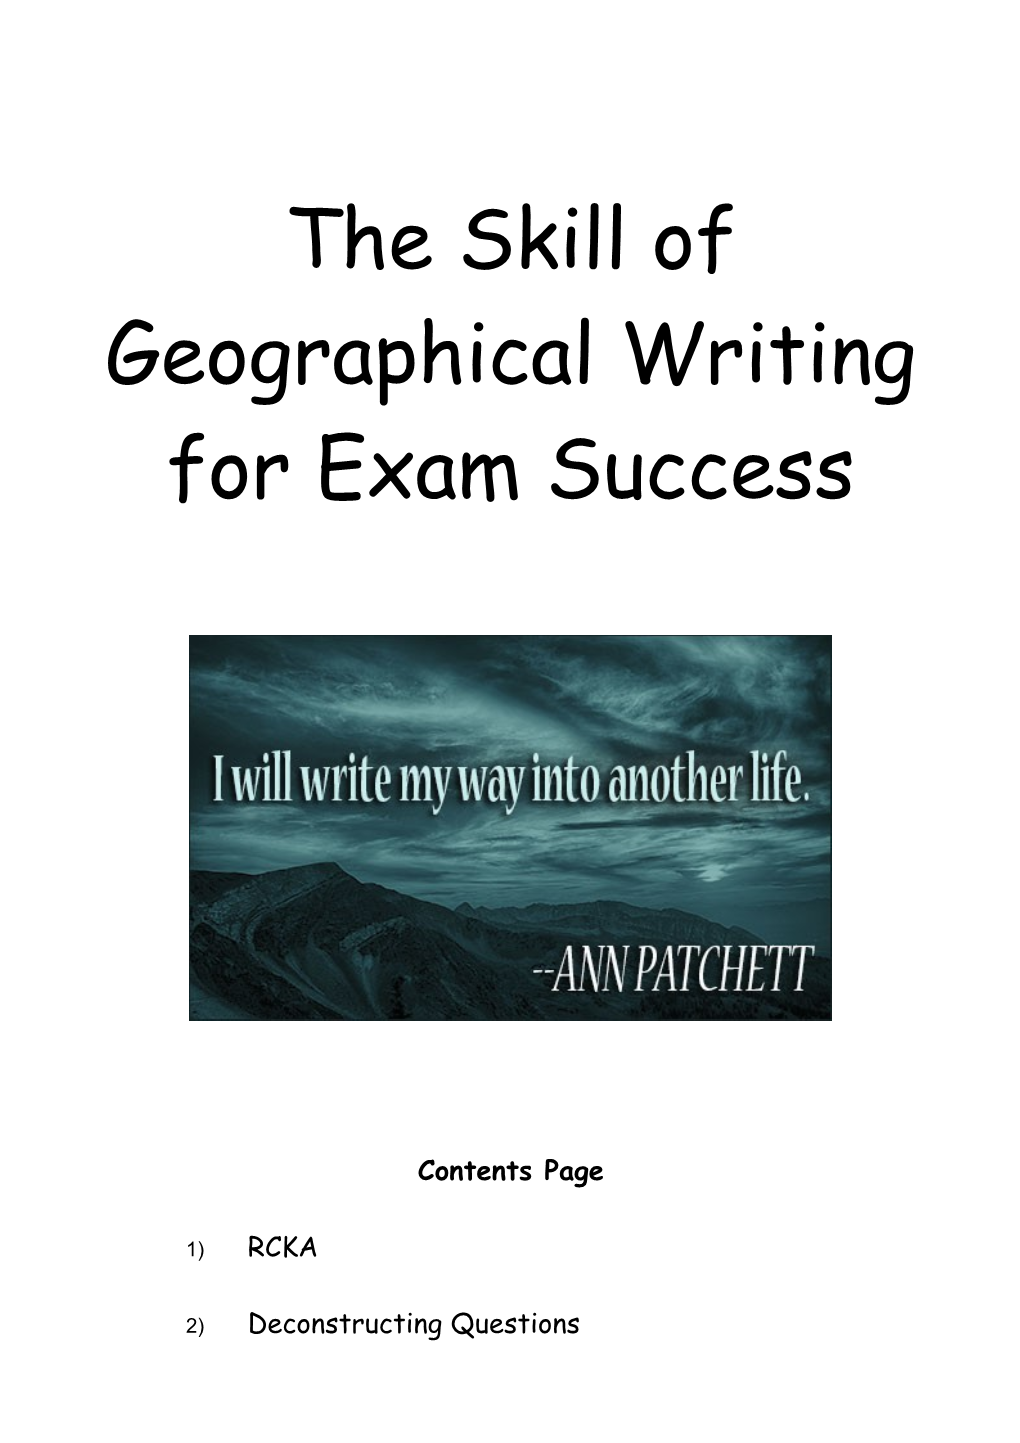 The Skill of Geographical Writing for Exam Success